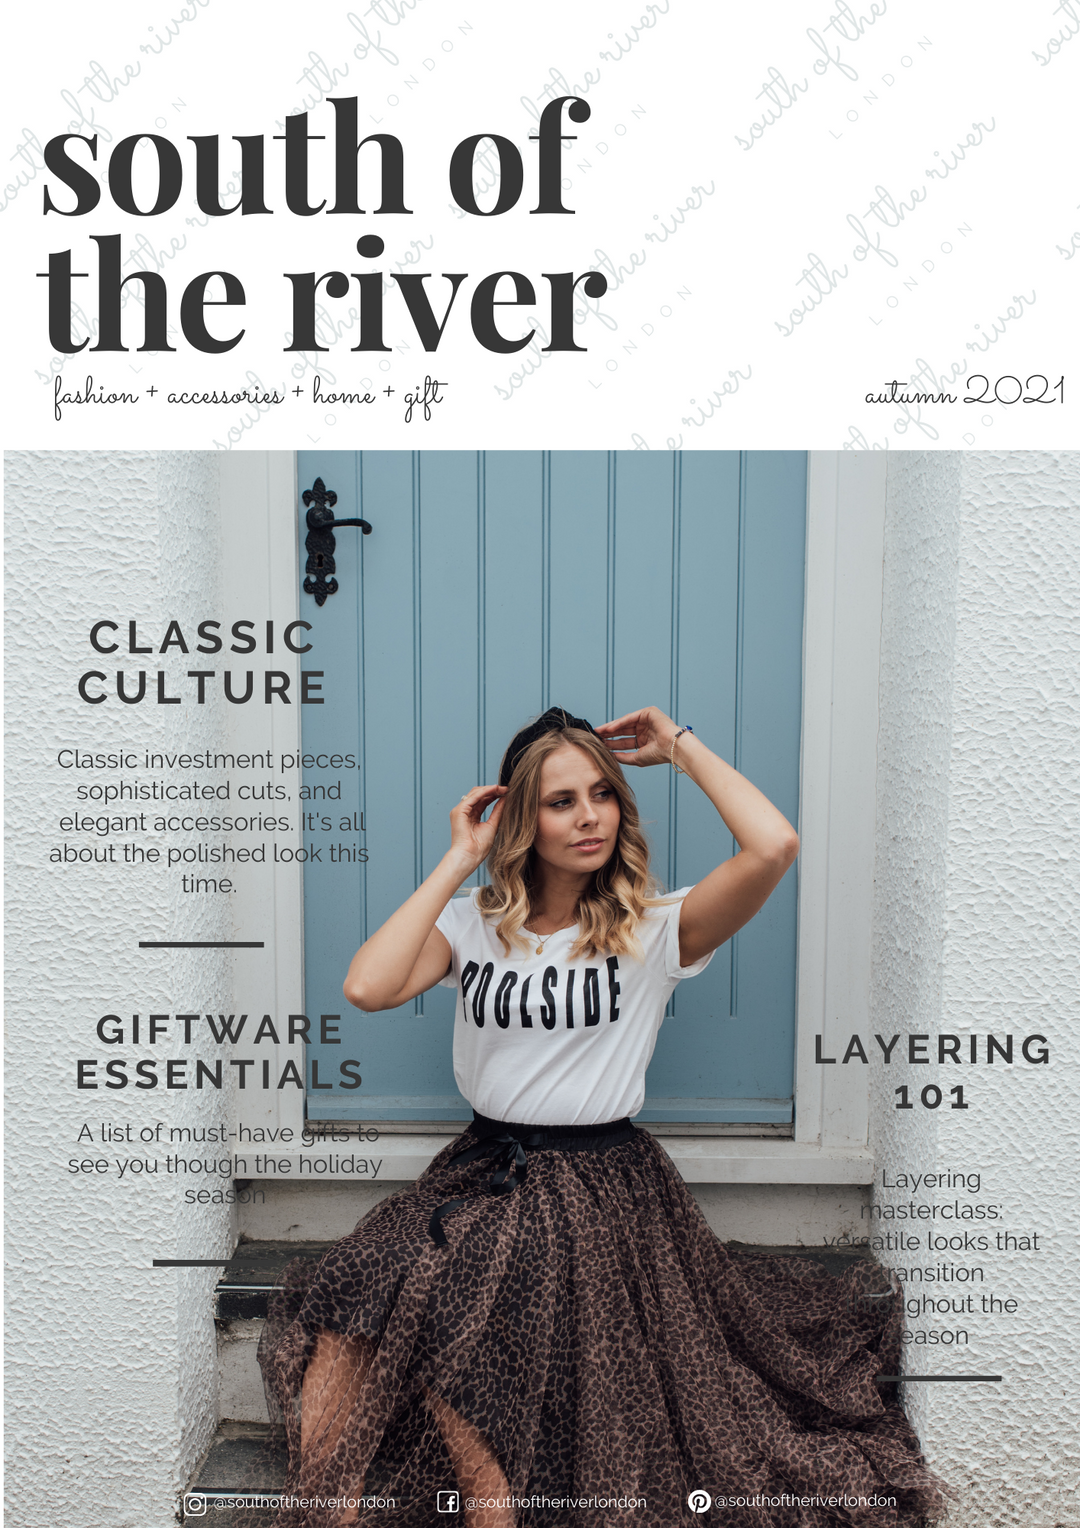 South Of The River News for Autumn